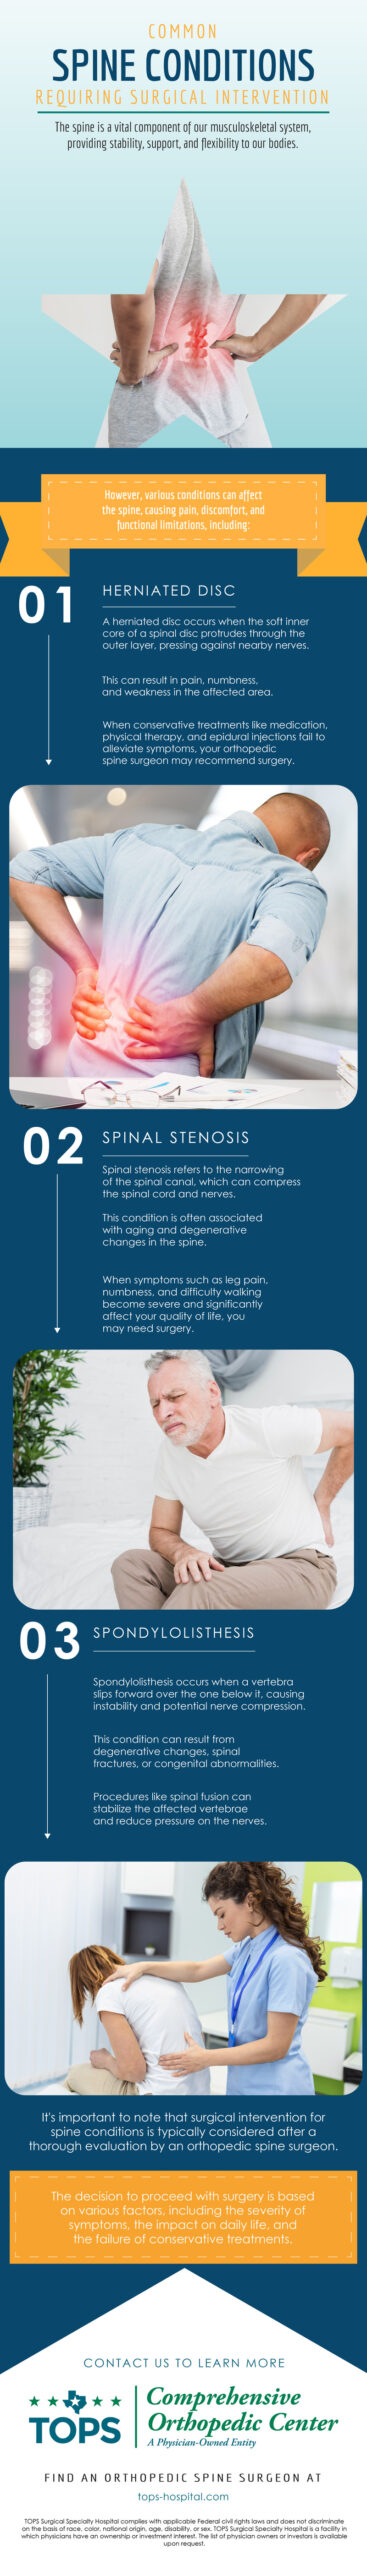 Common Spine Conditions Requiring Surgical Intervention